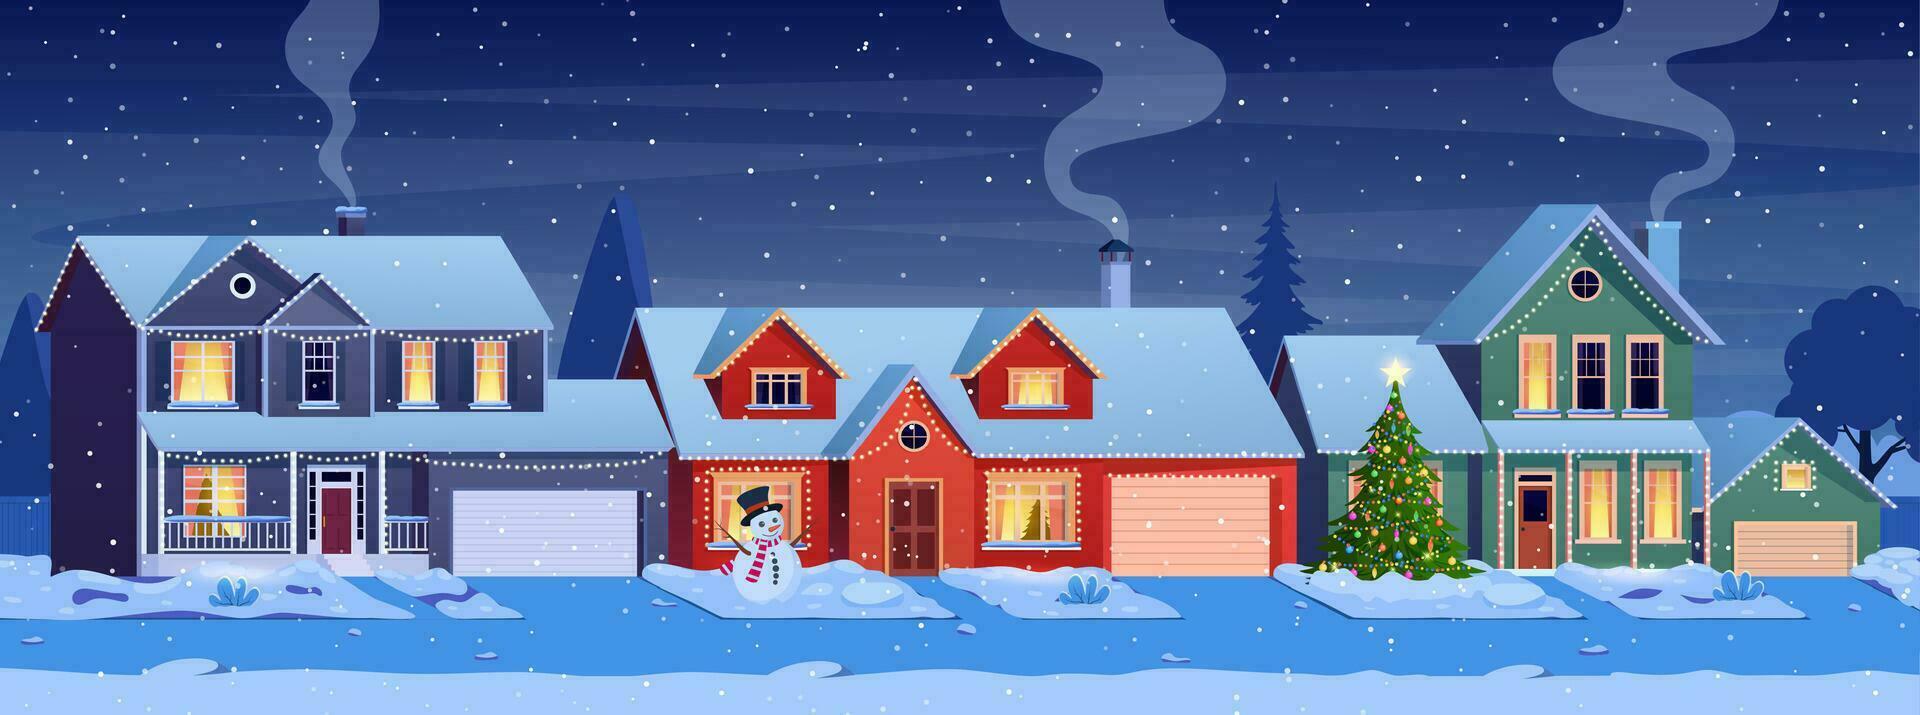 Residential houses with christmas decoration at night. cartoon winter landscape street with snow on roofs and holiday garlands, christmas tree, snowman. Vector illustration